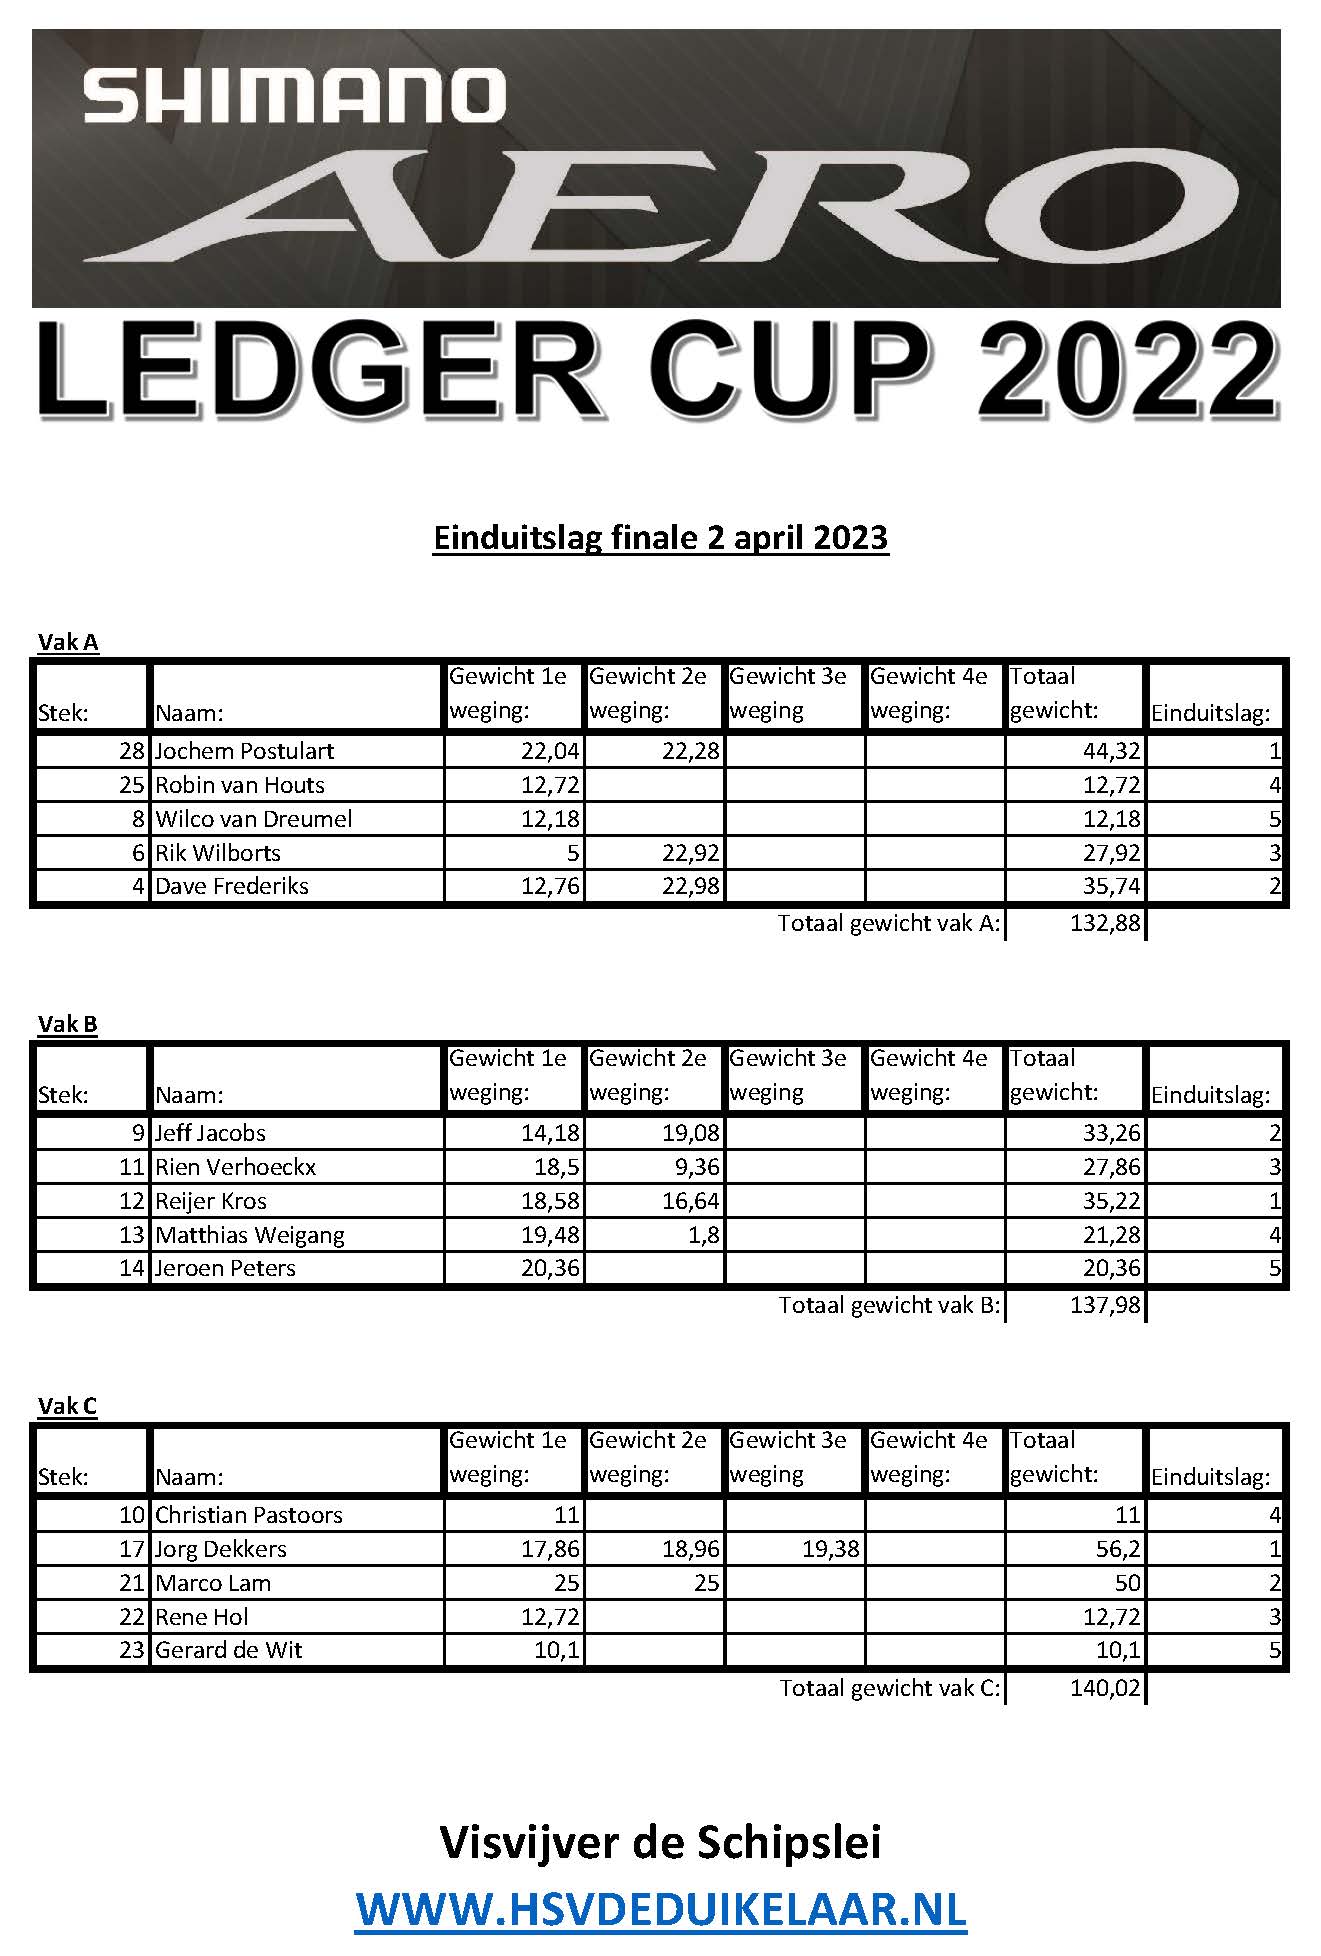 Shimano Ledger cup